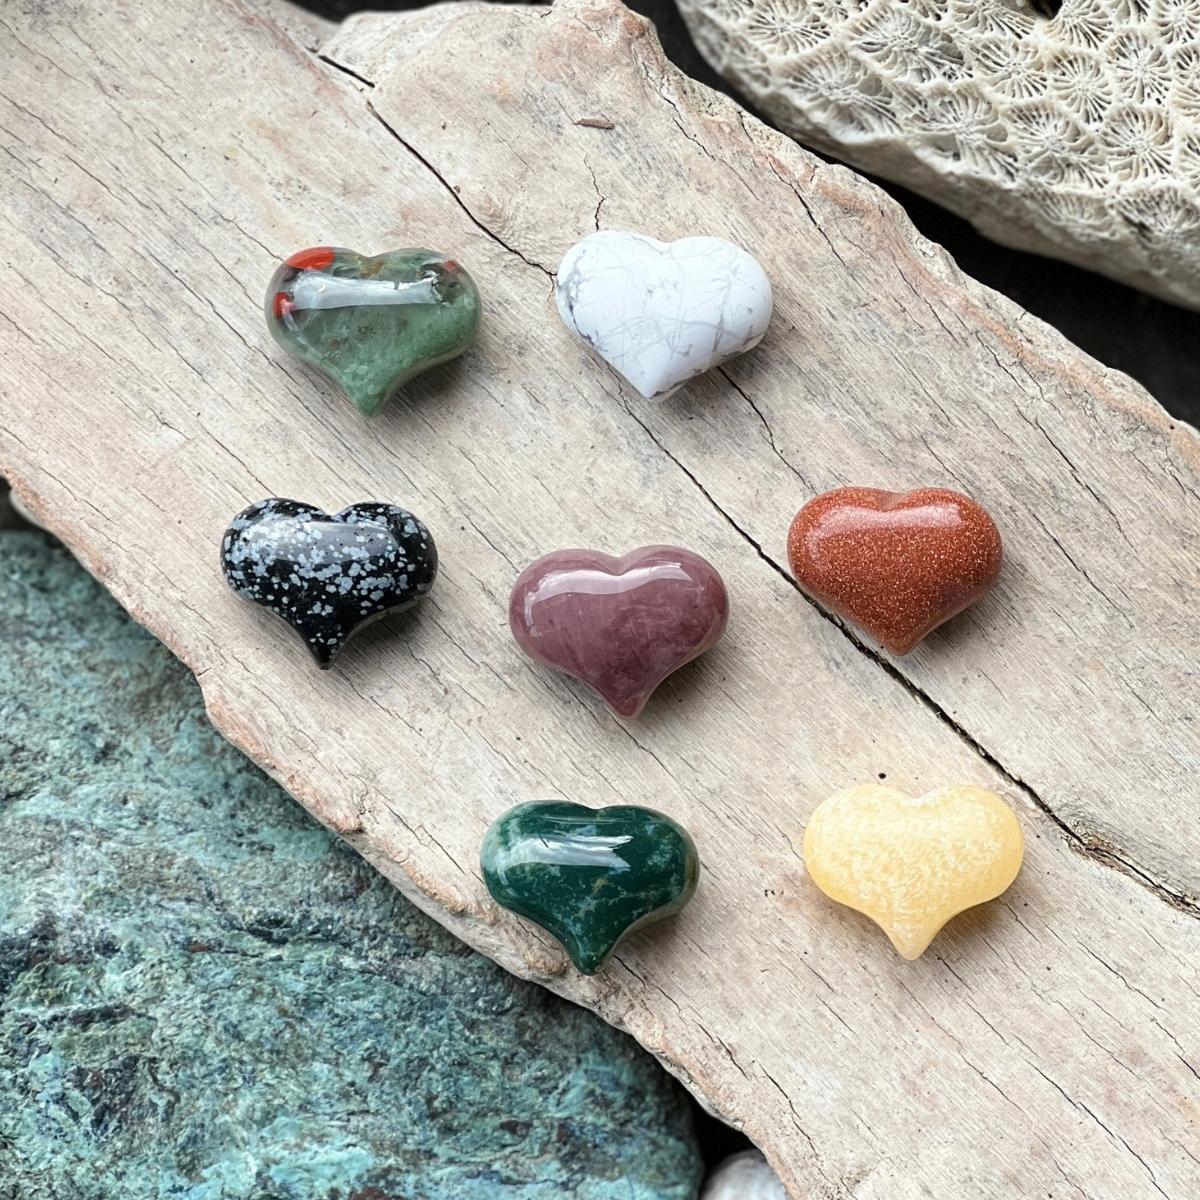 Unique and genuine Gold Sandstone Heart Shaped Healing Gemstone for Ambition and to to Help Achieve Your Goals. Called the Stone of Ambition, it is said that Goldstone will assist in attaining one’s goals. In keeping one’s emotions stable and calm.